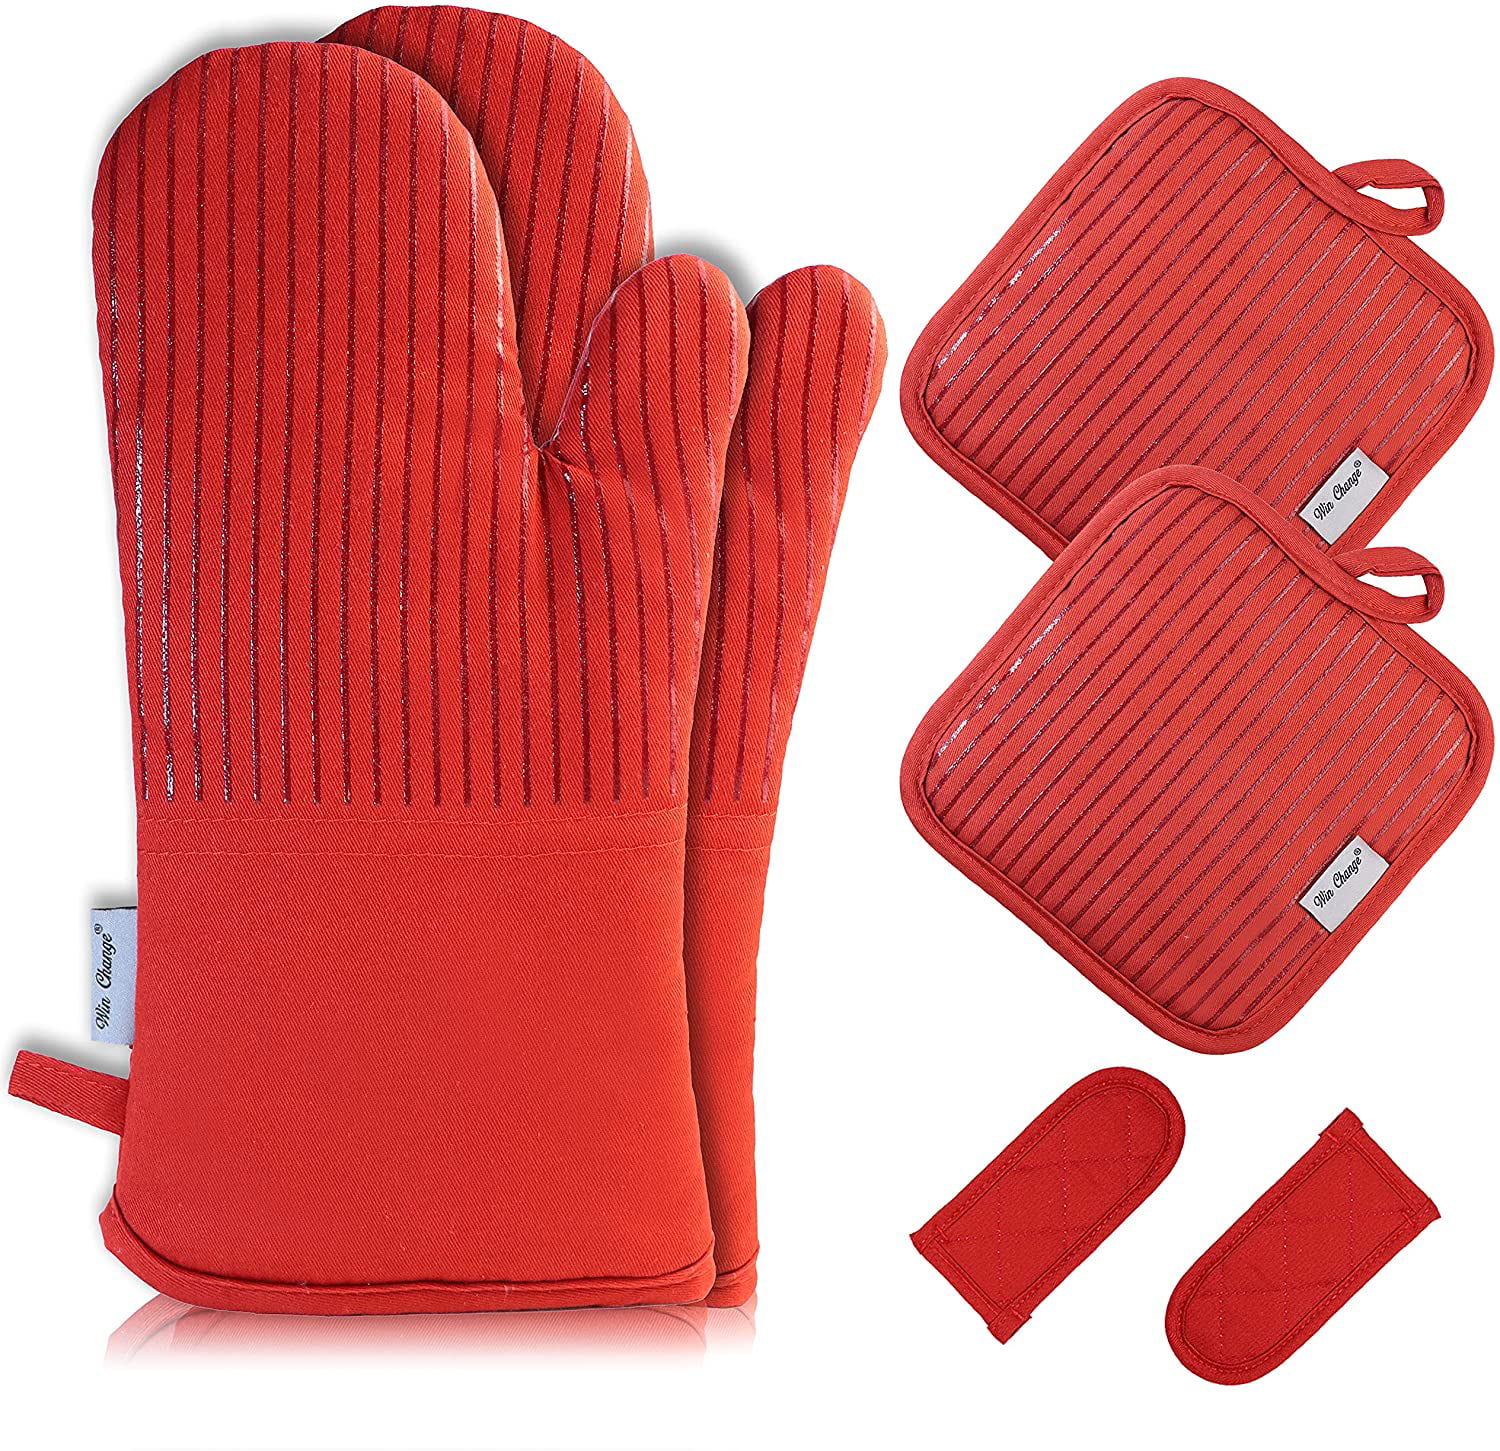 Set of 2 Red Baking Oven Pinch Mitts Silicone 500 Degree Heat Resistant NEW 